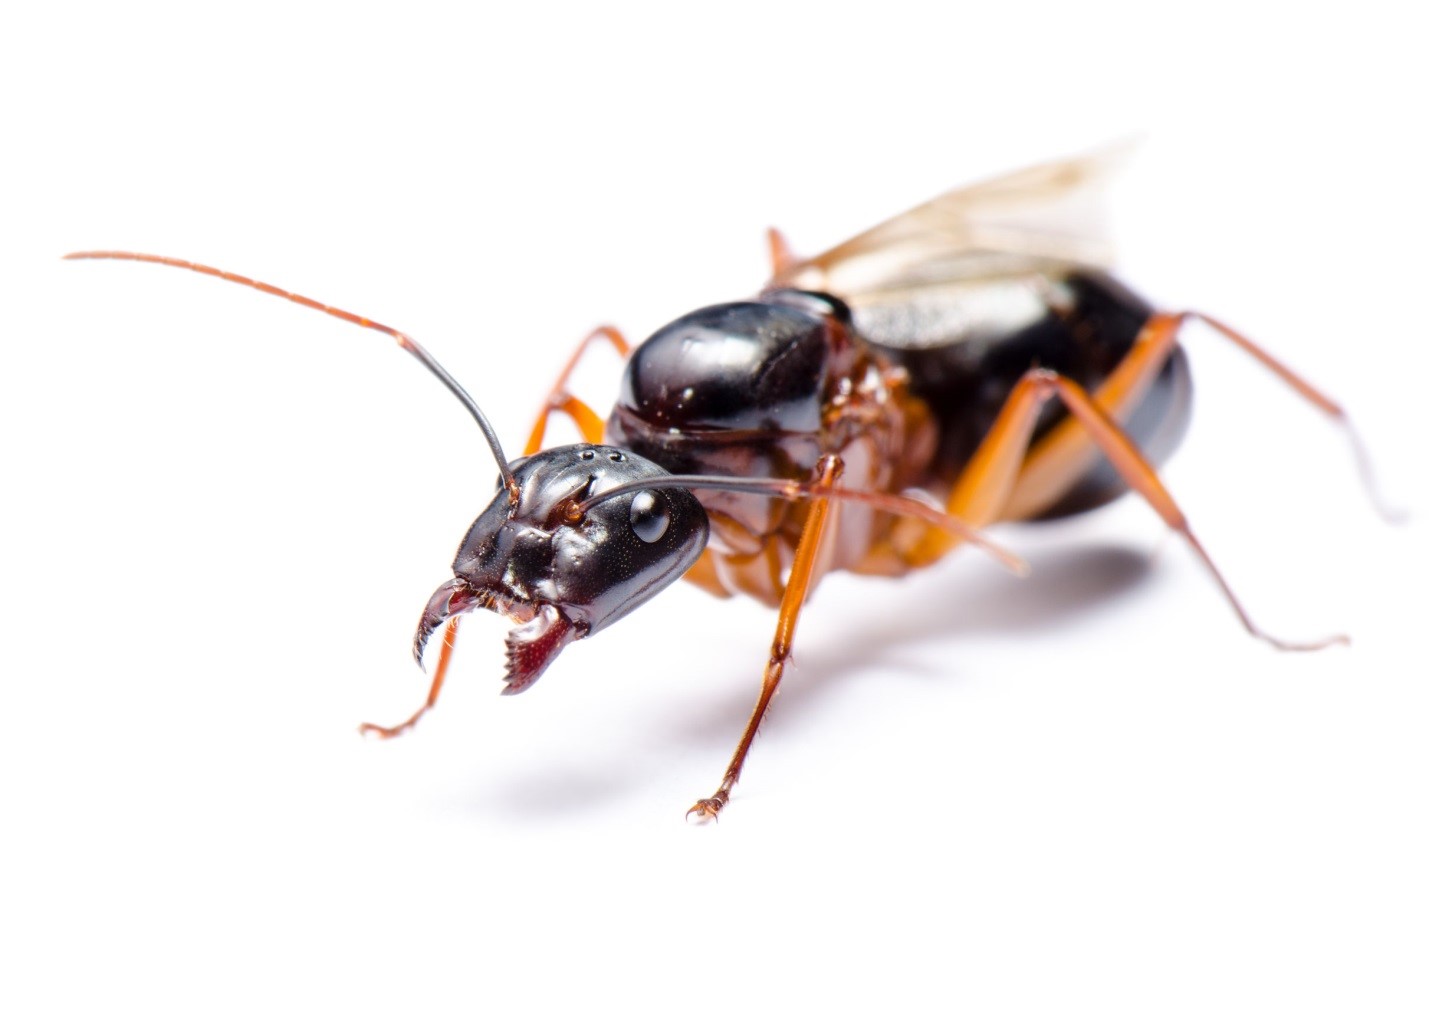 Structural Pests - Carpenter Ants, Much More than Just a Nuisance in the Greater Toronto Area